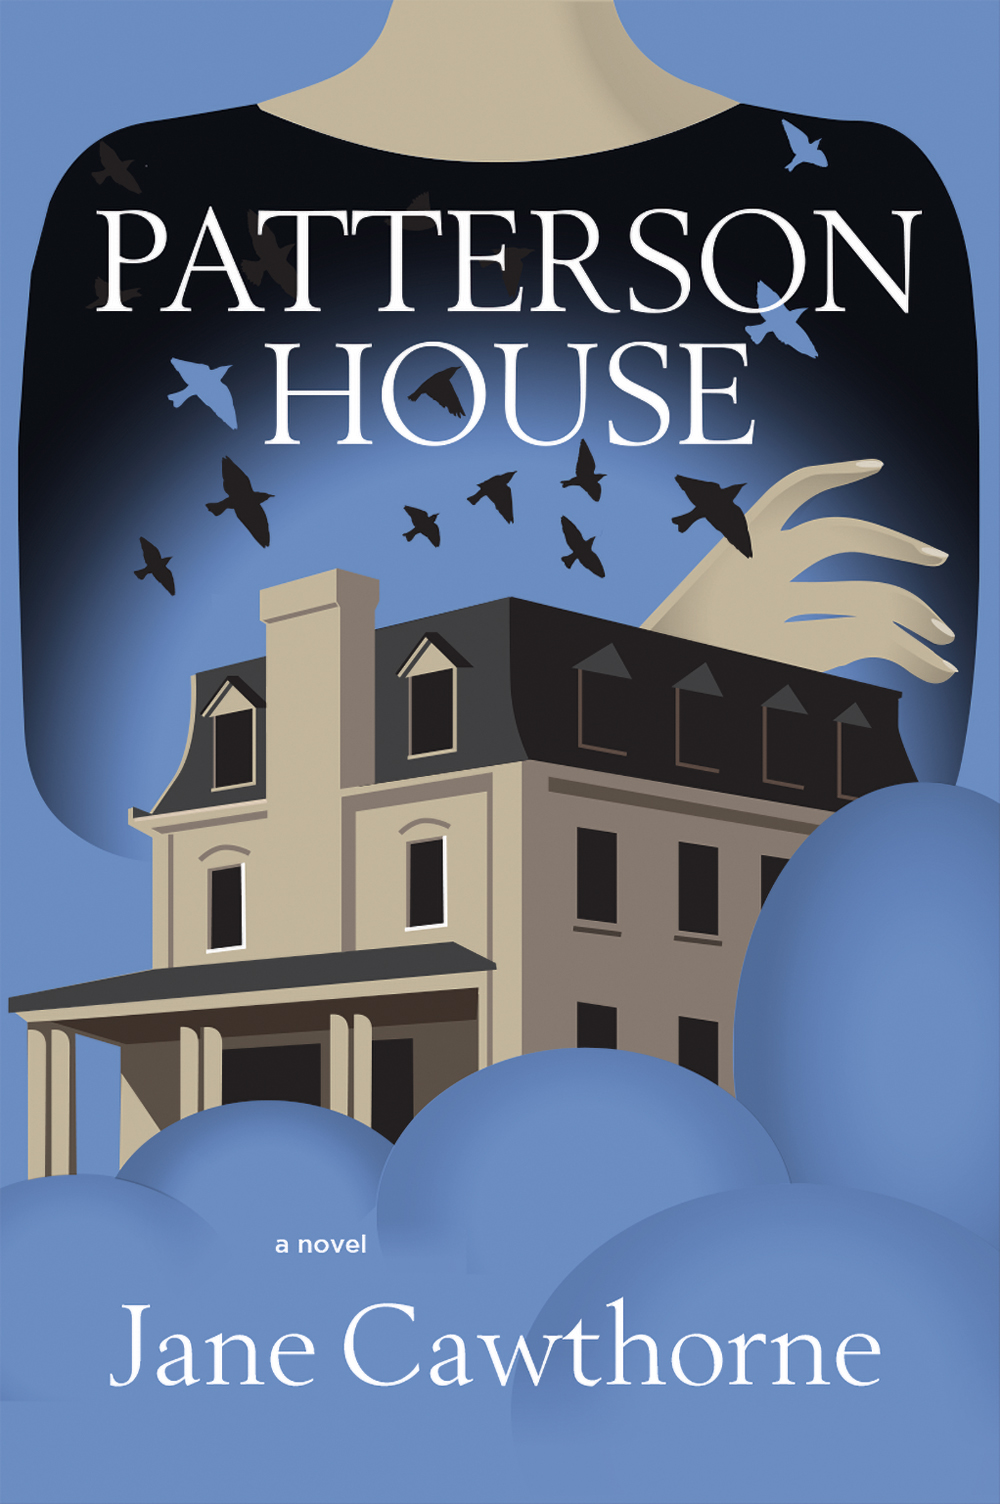 Book cover: blue background featuring the neck and black bloused arms of a woman. Arms are crossed. Also featured is a large house and birds flying in the sky. White typography at the top and bottom "Patterson House" "a novel" "Jane Cawthorne"